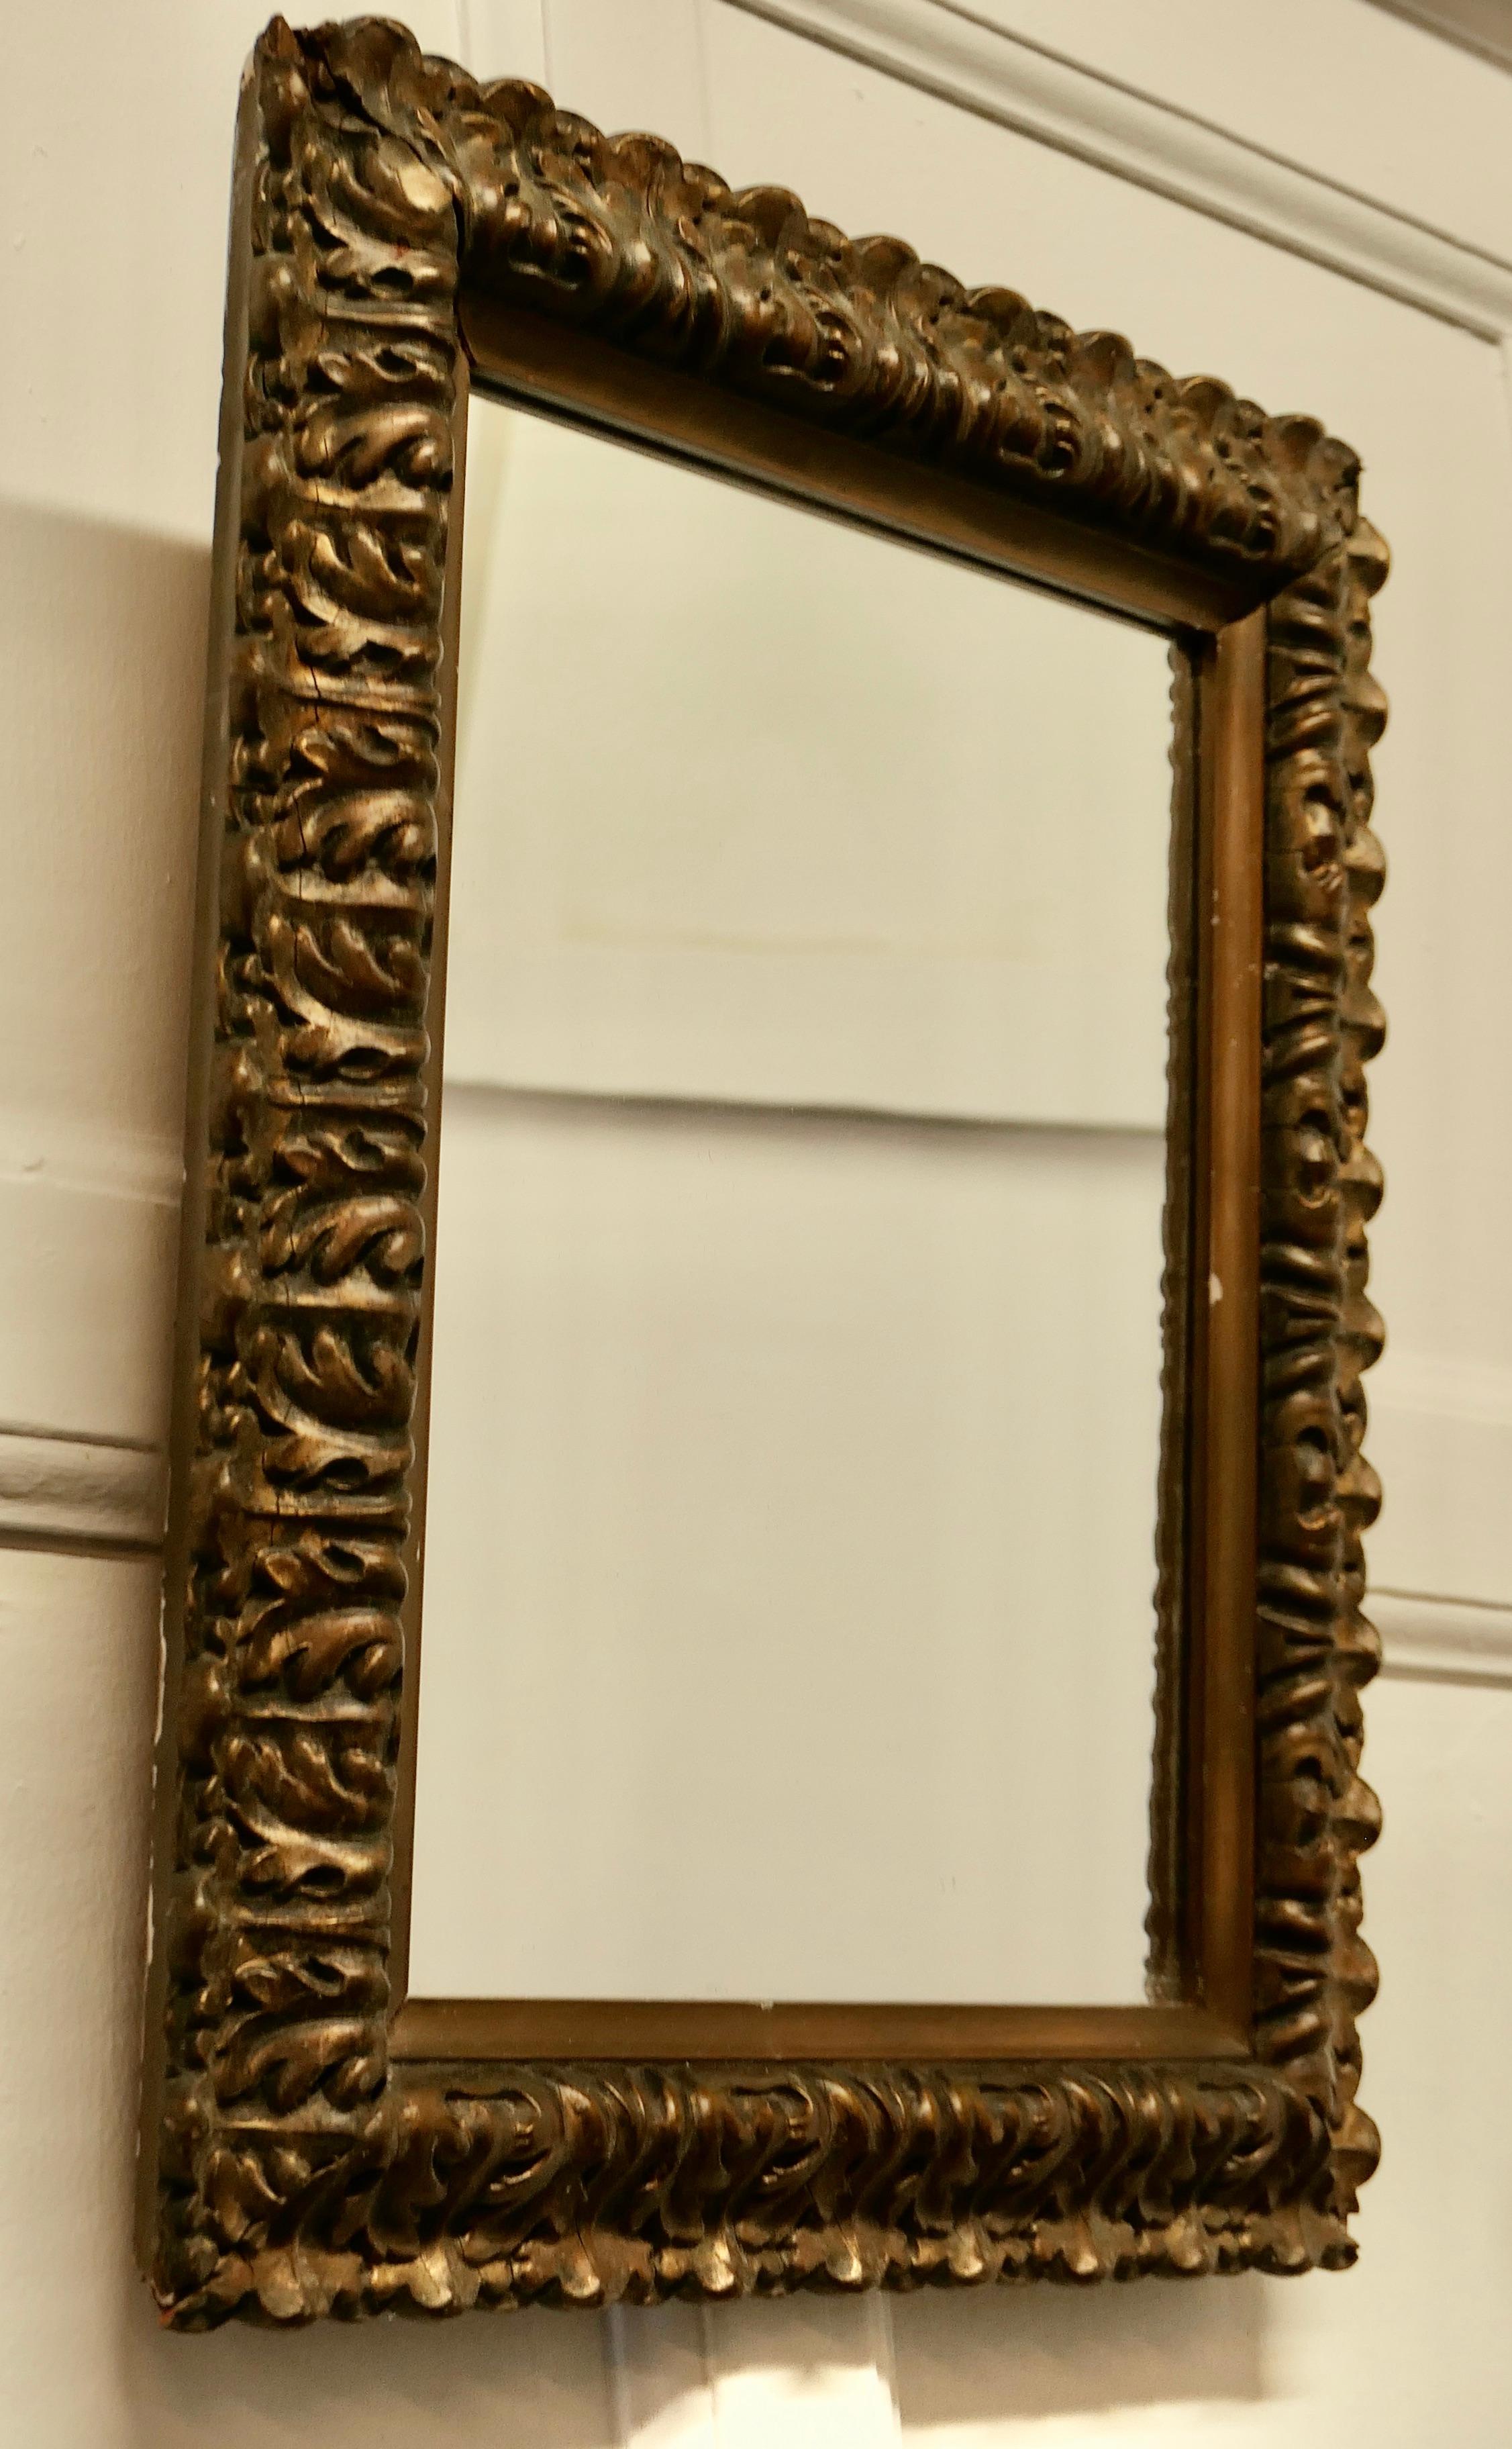 Victorian Beautiful 19th Century Gilt Wall Mirror This Is a Lovely Old Mirror For Sale